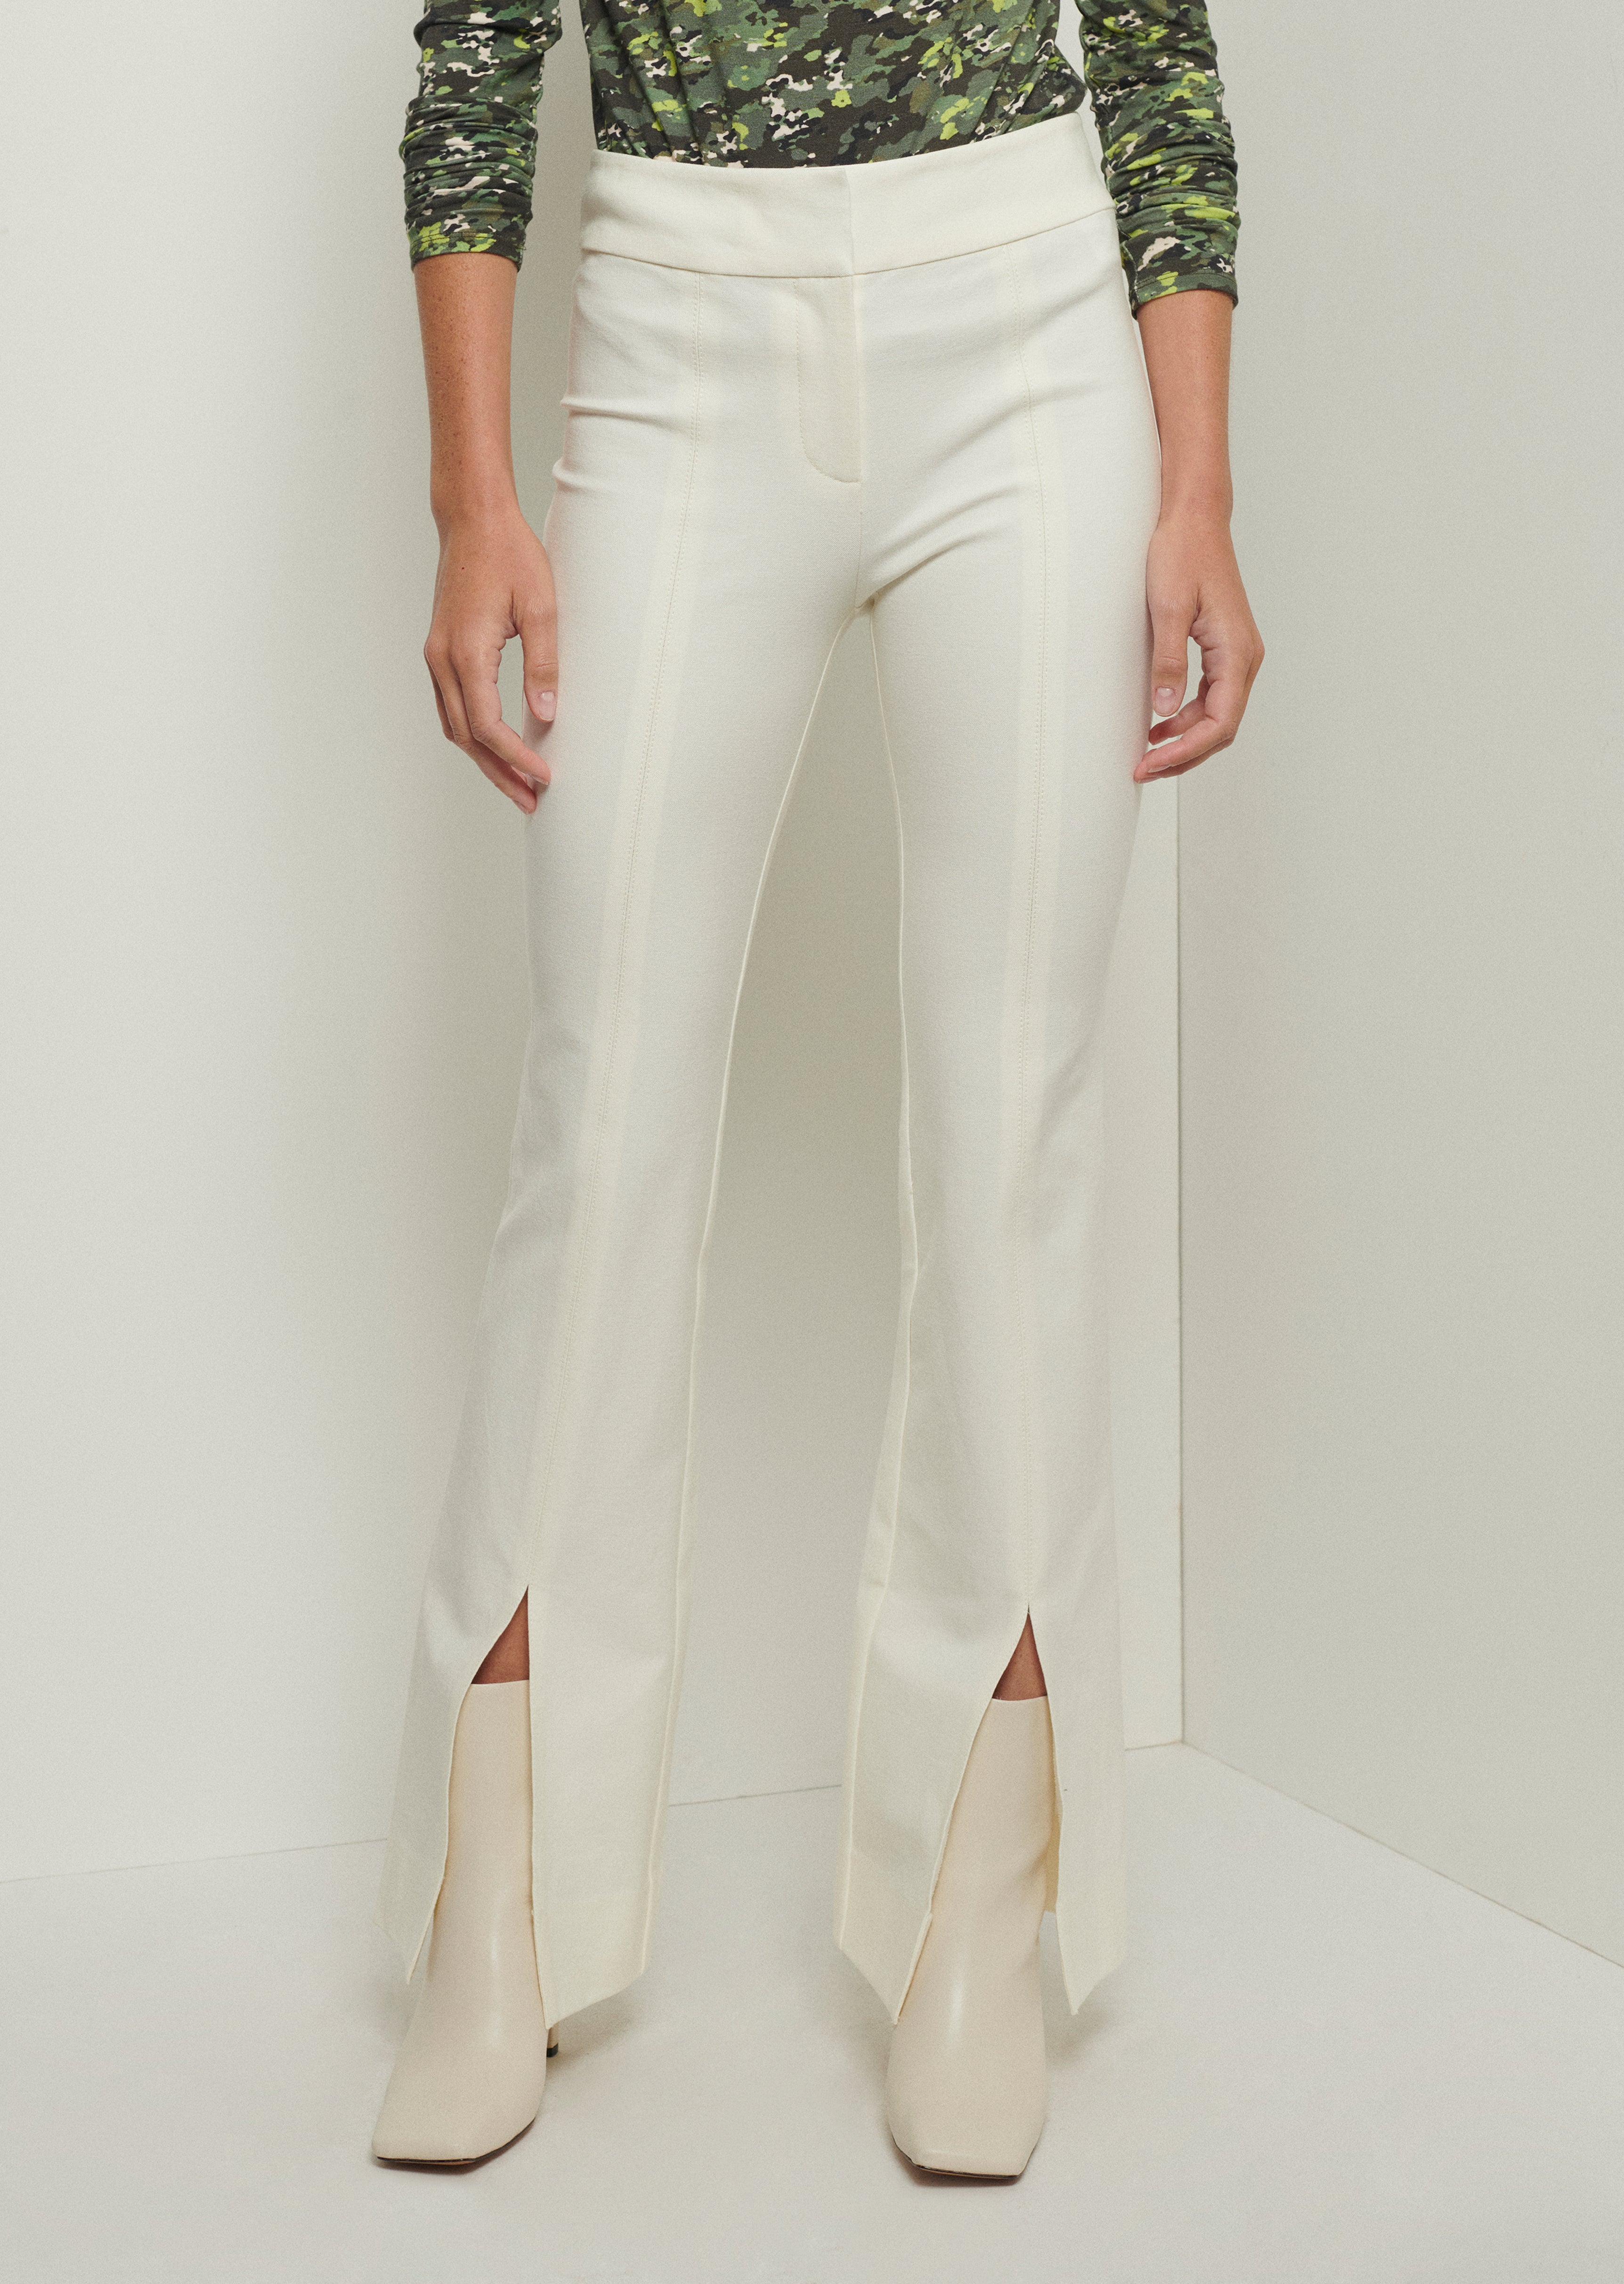 White High-Waisted Side Slit Flare Pants with Pockets